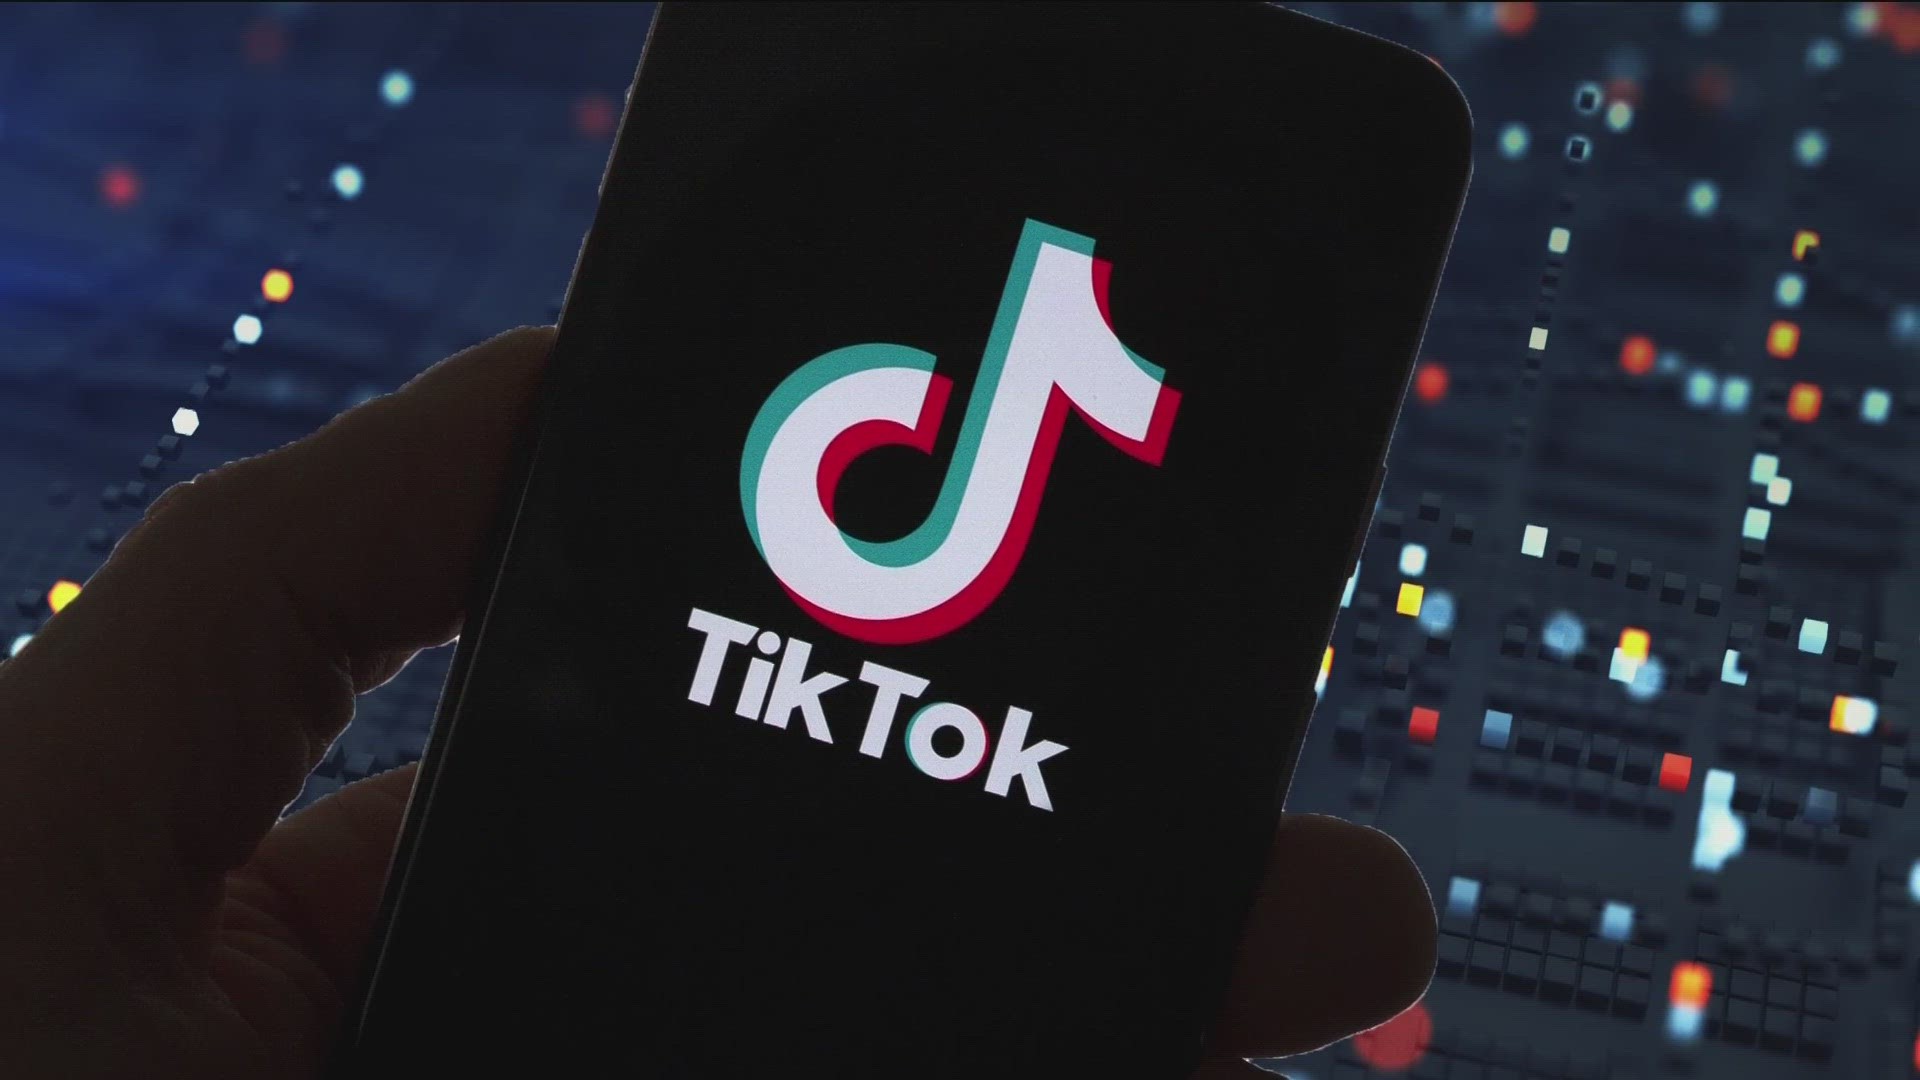 TikTok released a statement saying a ban would "trample the free speech rights of 170 million Americans and devastate 7 million businesses."